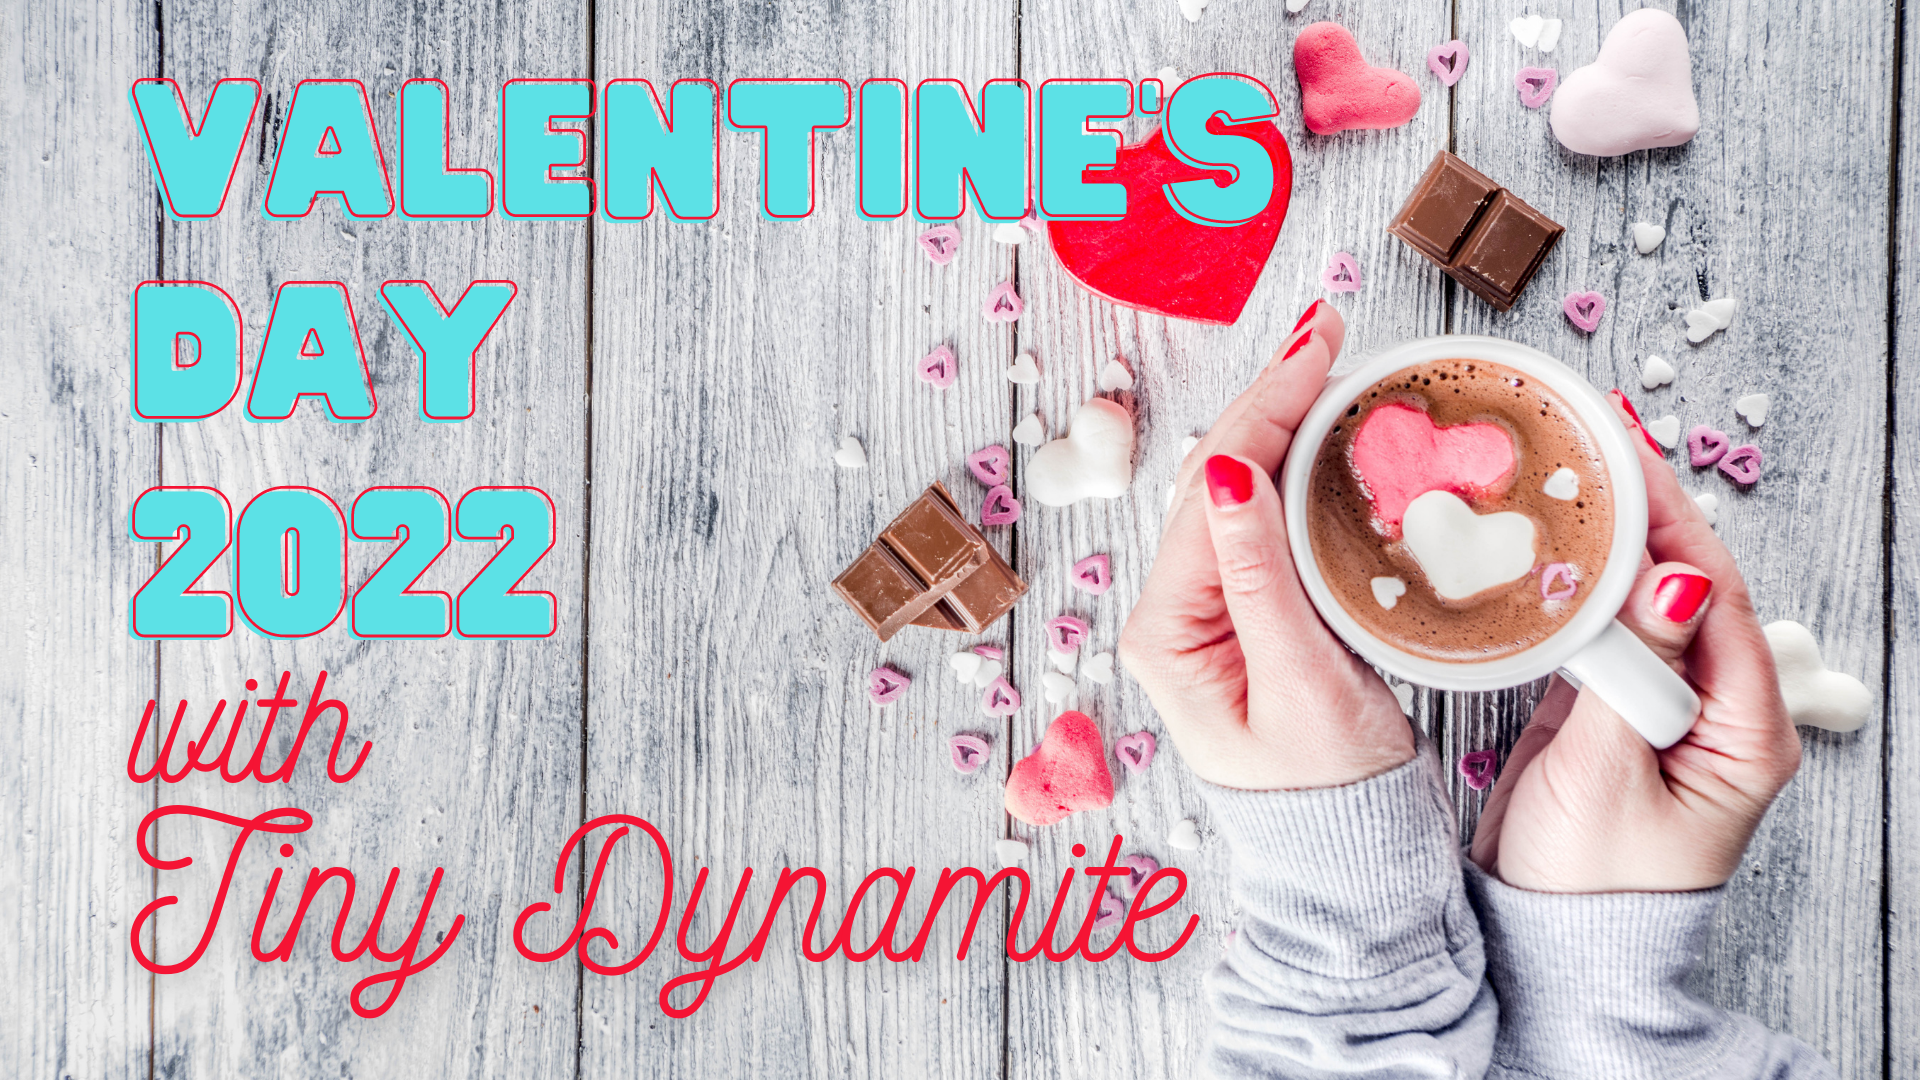 A hand with red nail polish holds a mug of hot chocolate with hearts and candy scattered around. The text says "Valentine's Day 2022 with Tiny Dynamite."